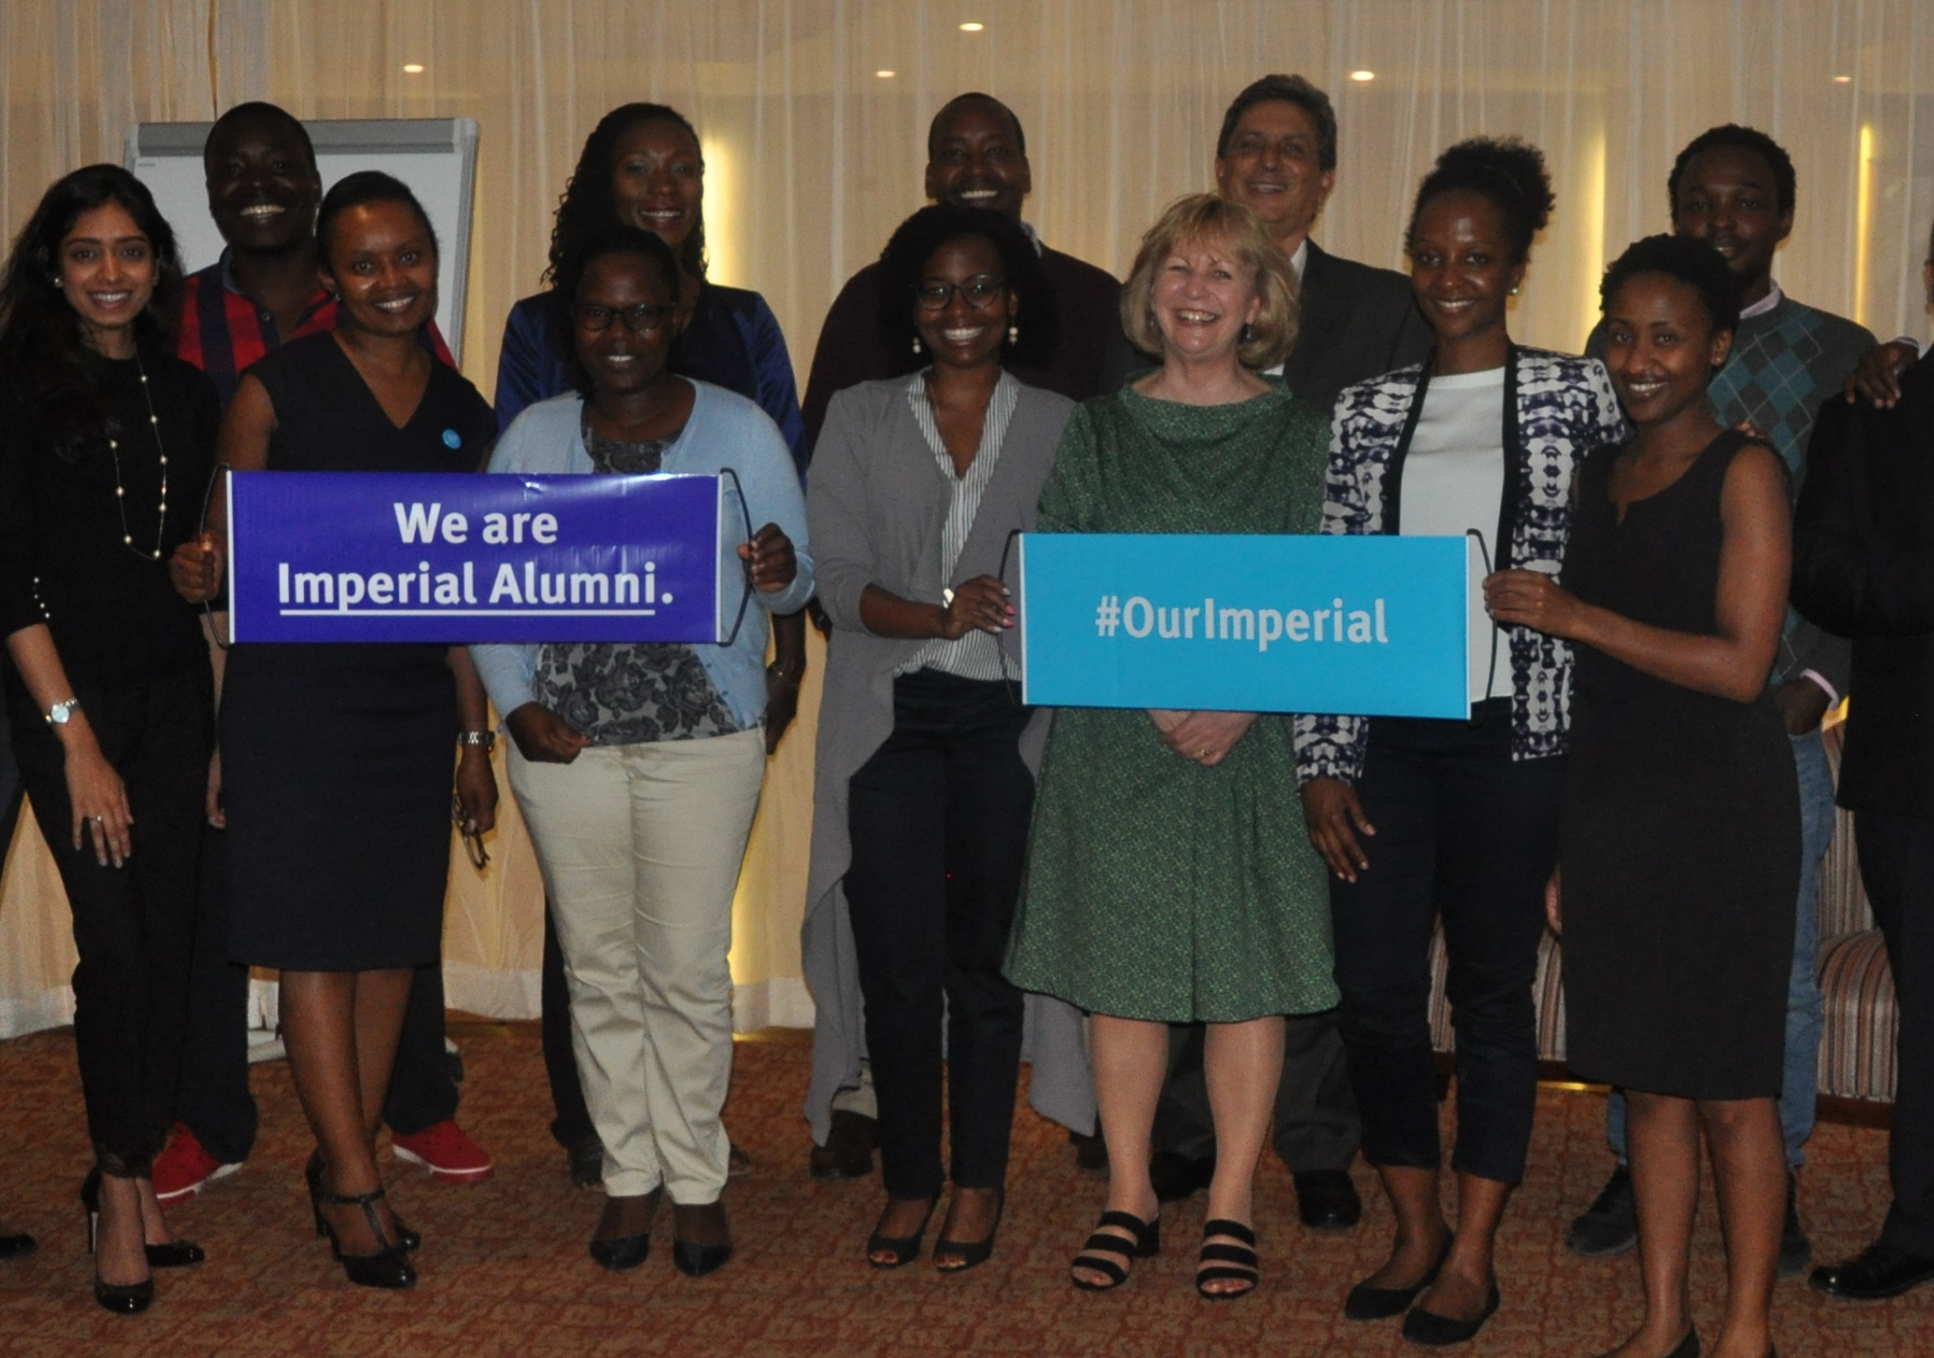 Nairobi in Kenya also held its first ever Imperial alumni event during the trip